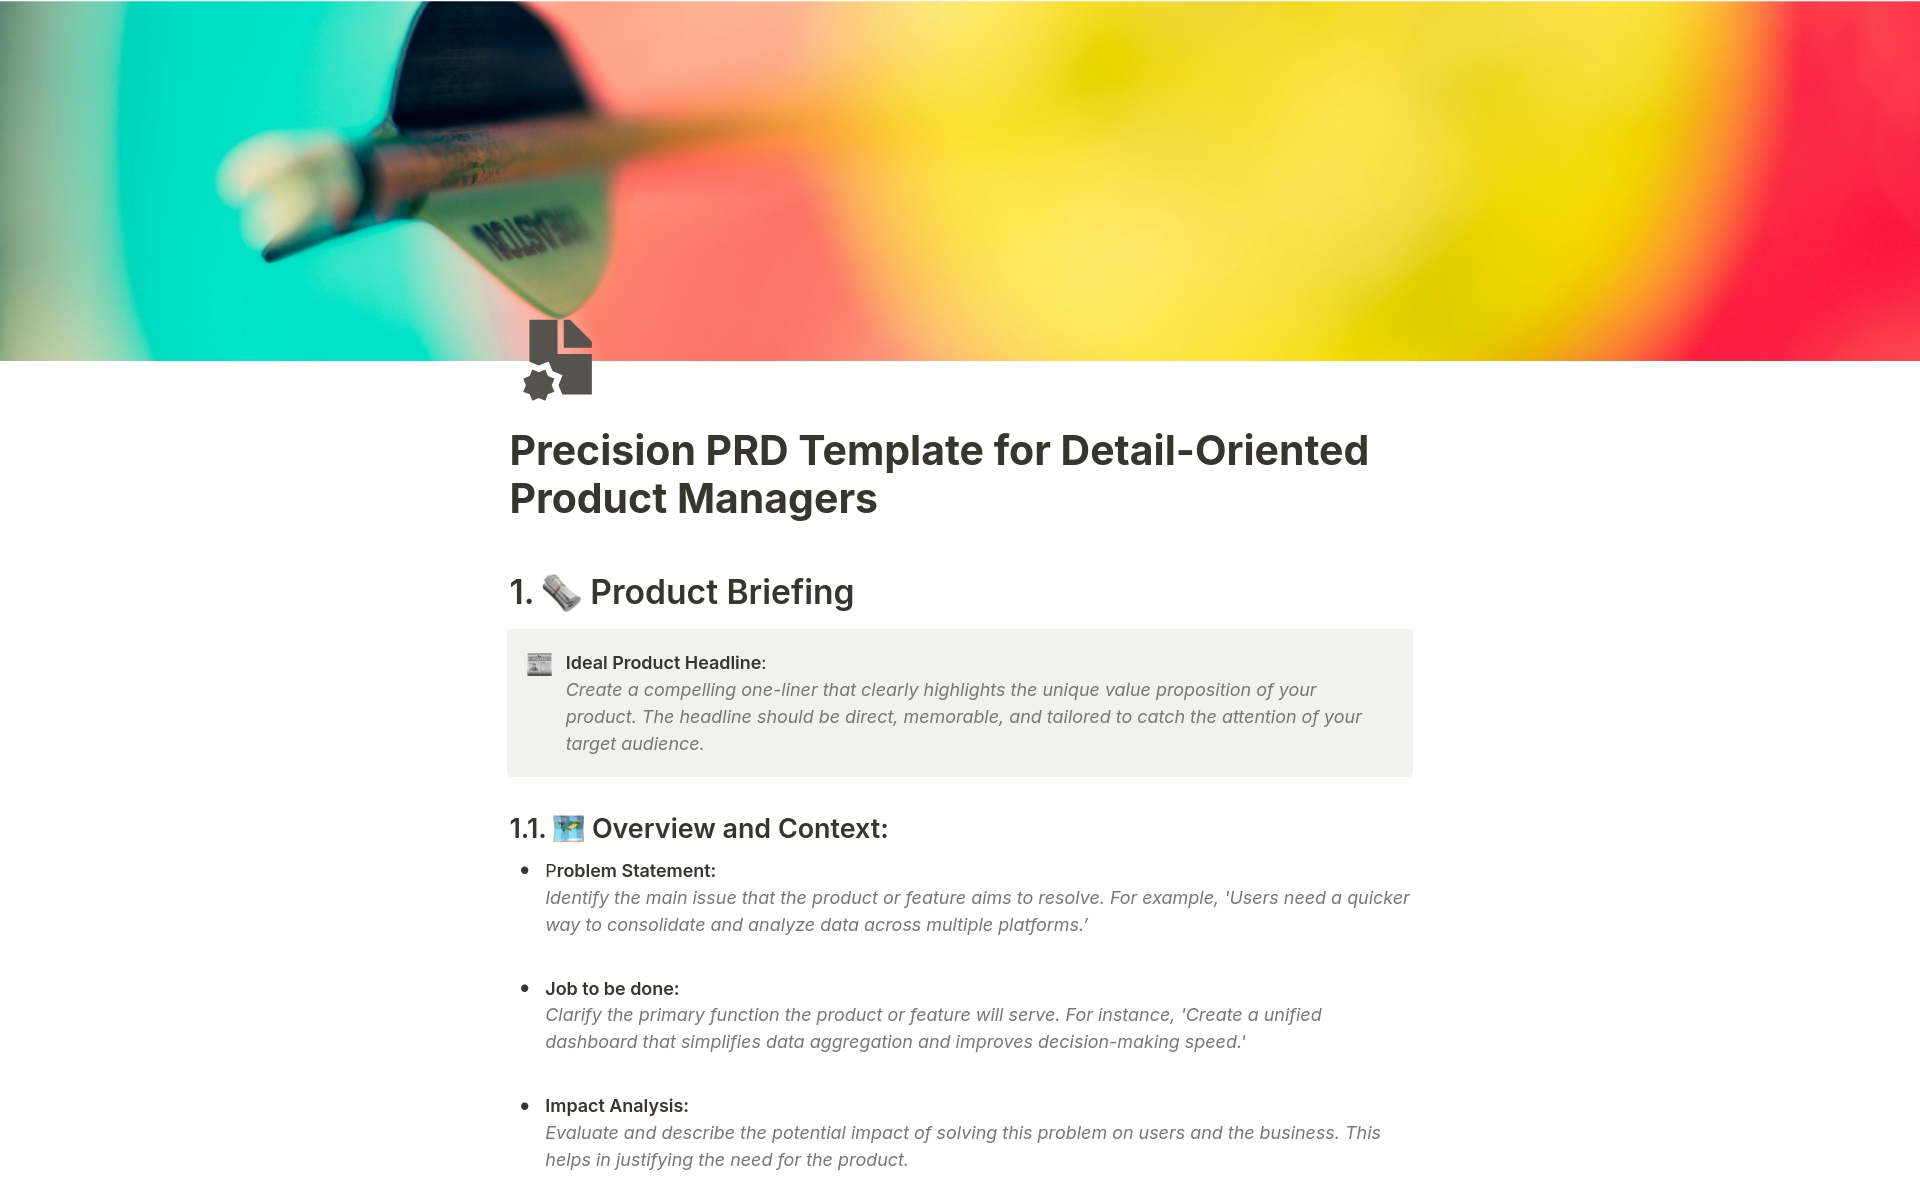 This Precision PRD Template is tailored for product managers and development teams to craft detailed product plans efficiently. Optimized for modern workflows, it features collapsible sections that enhance clarity, making it perfect for dynamic stakeholder presentations.